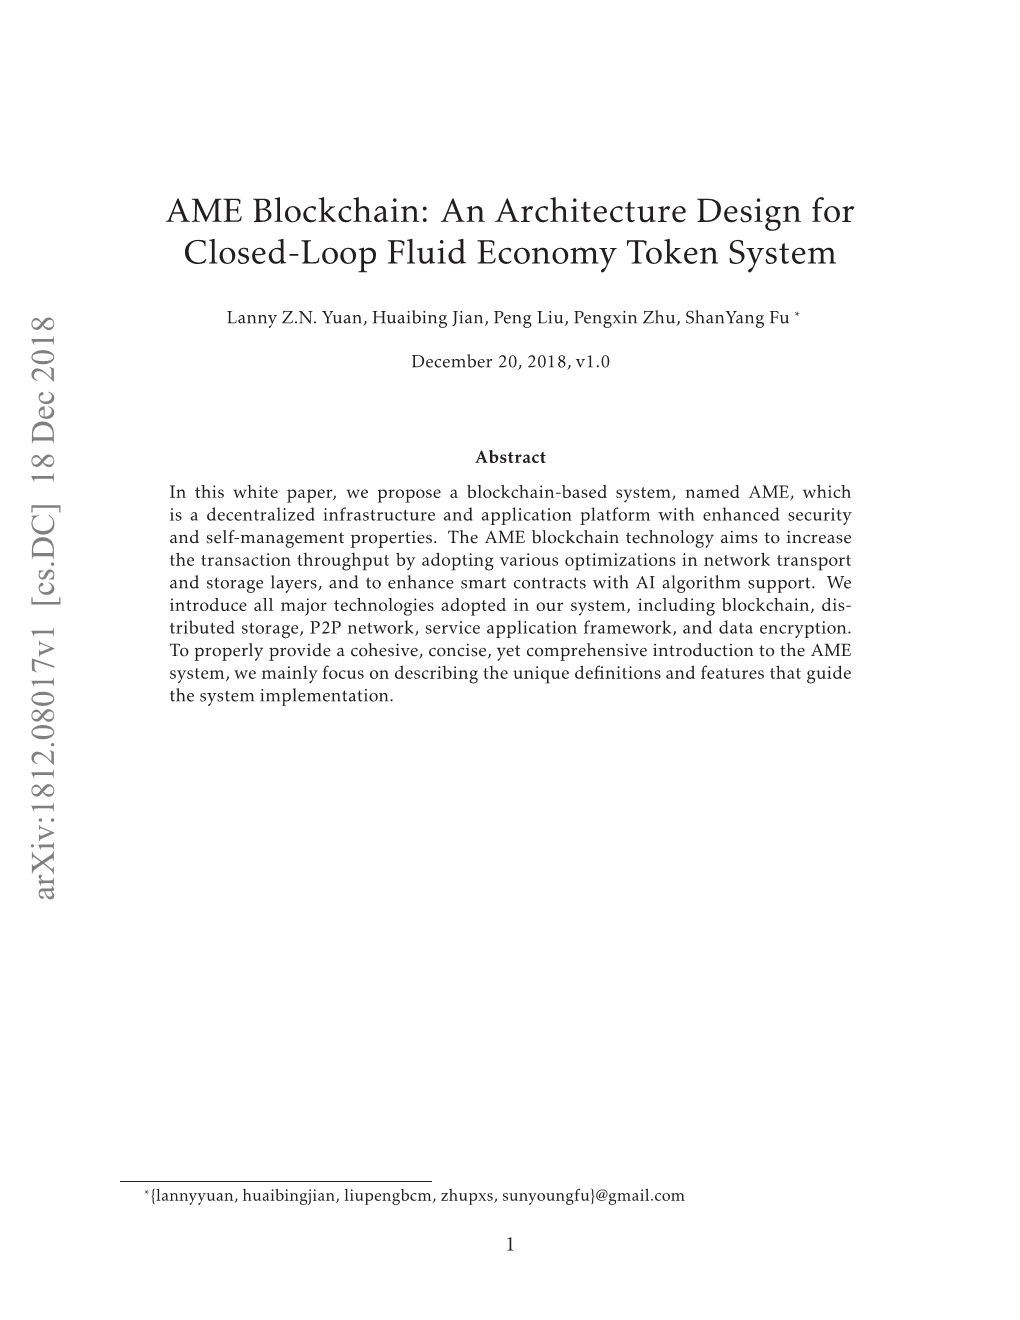 AME Blockchain: an Architecture Design for Closed-Loop